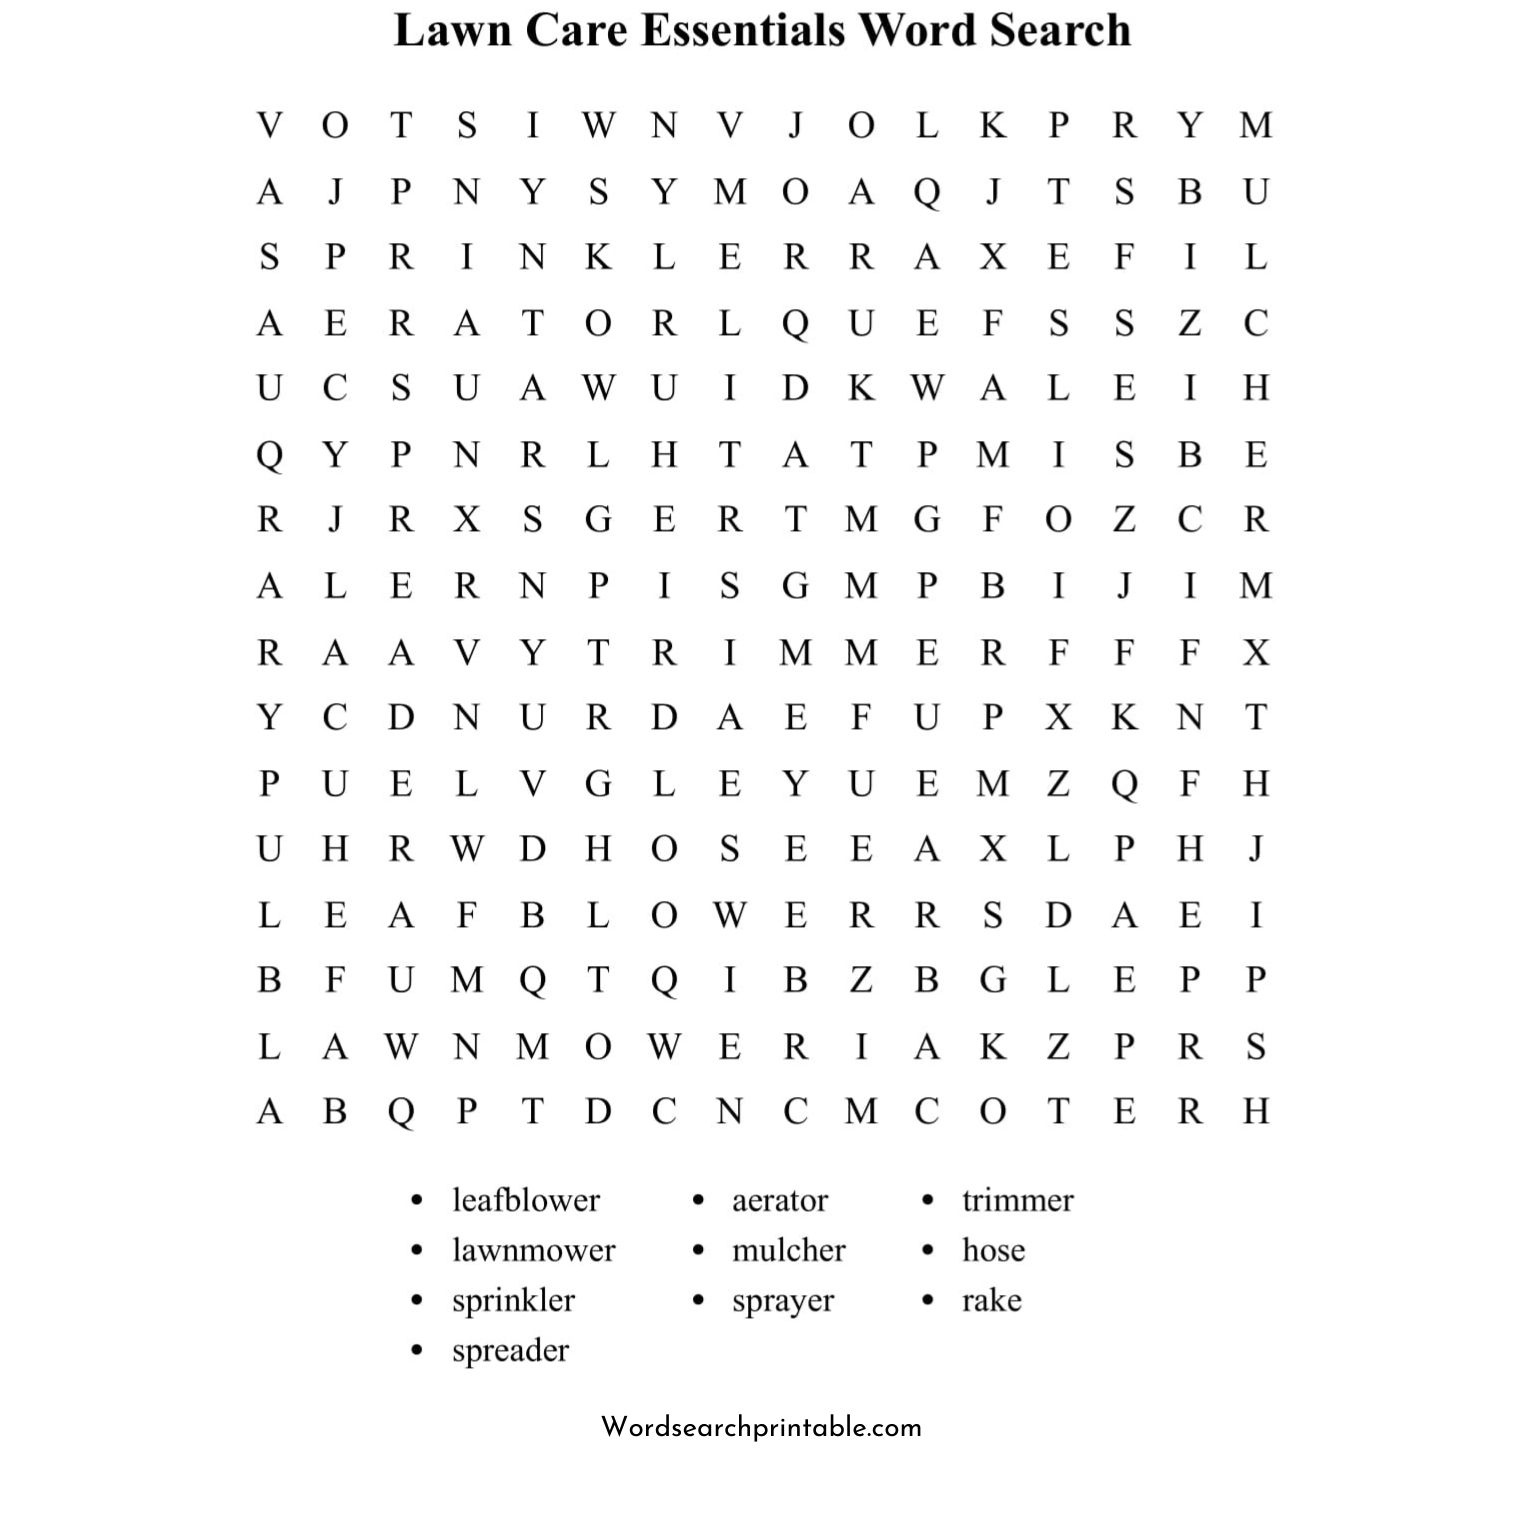 lawn care essentials word search puzzle